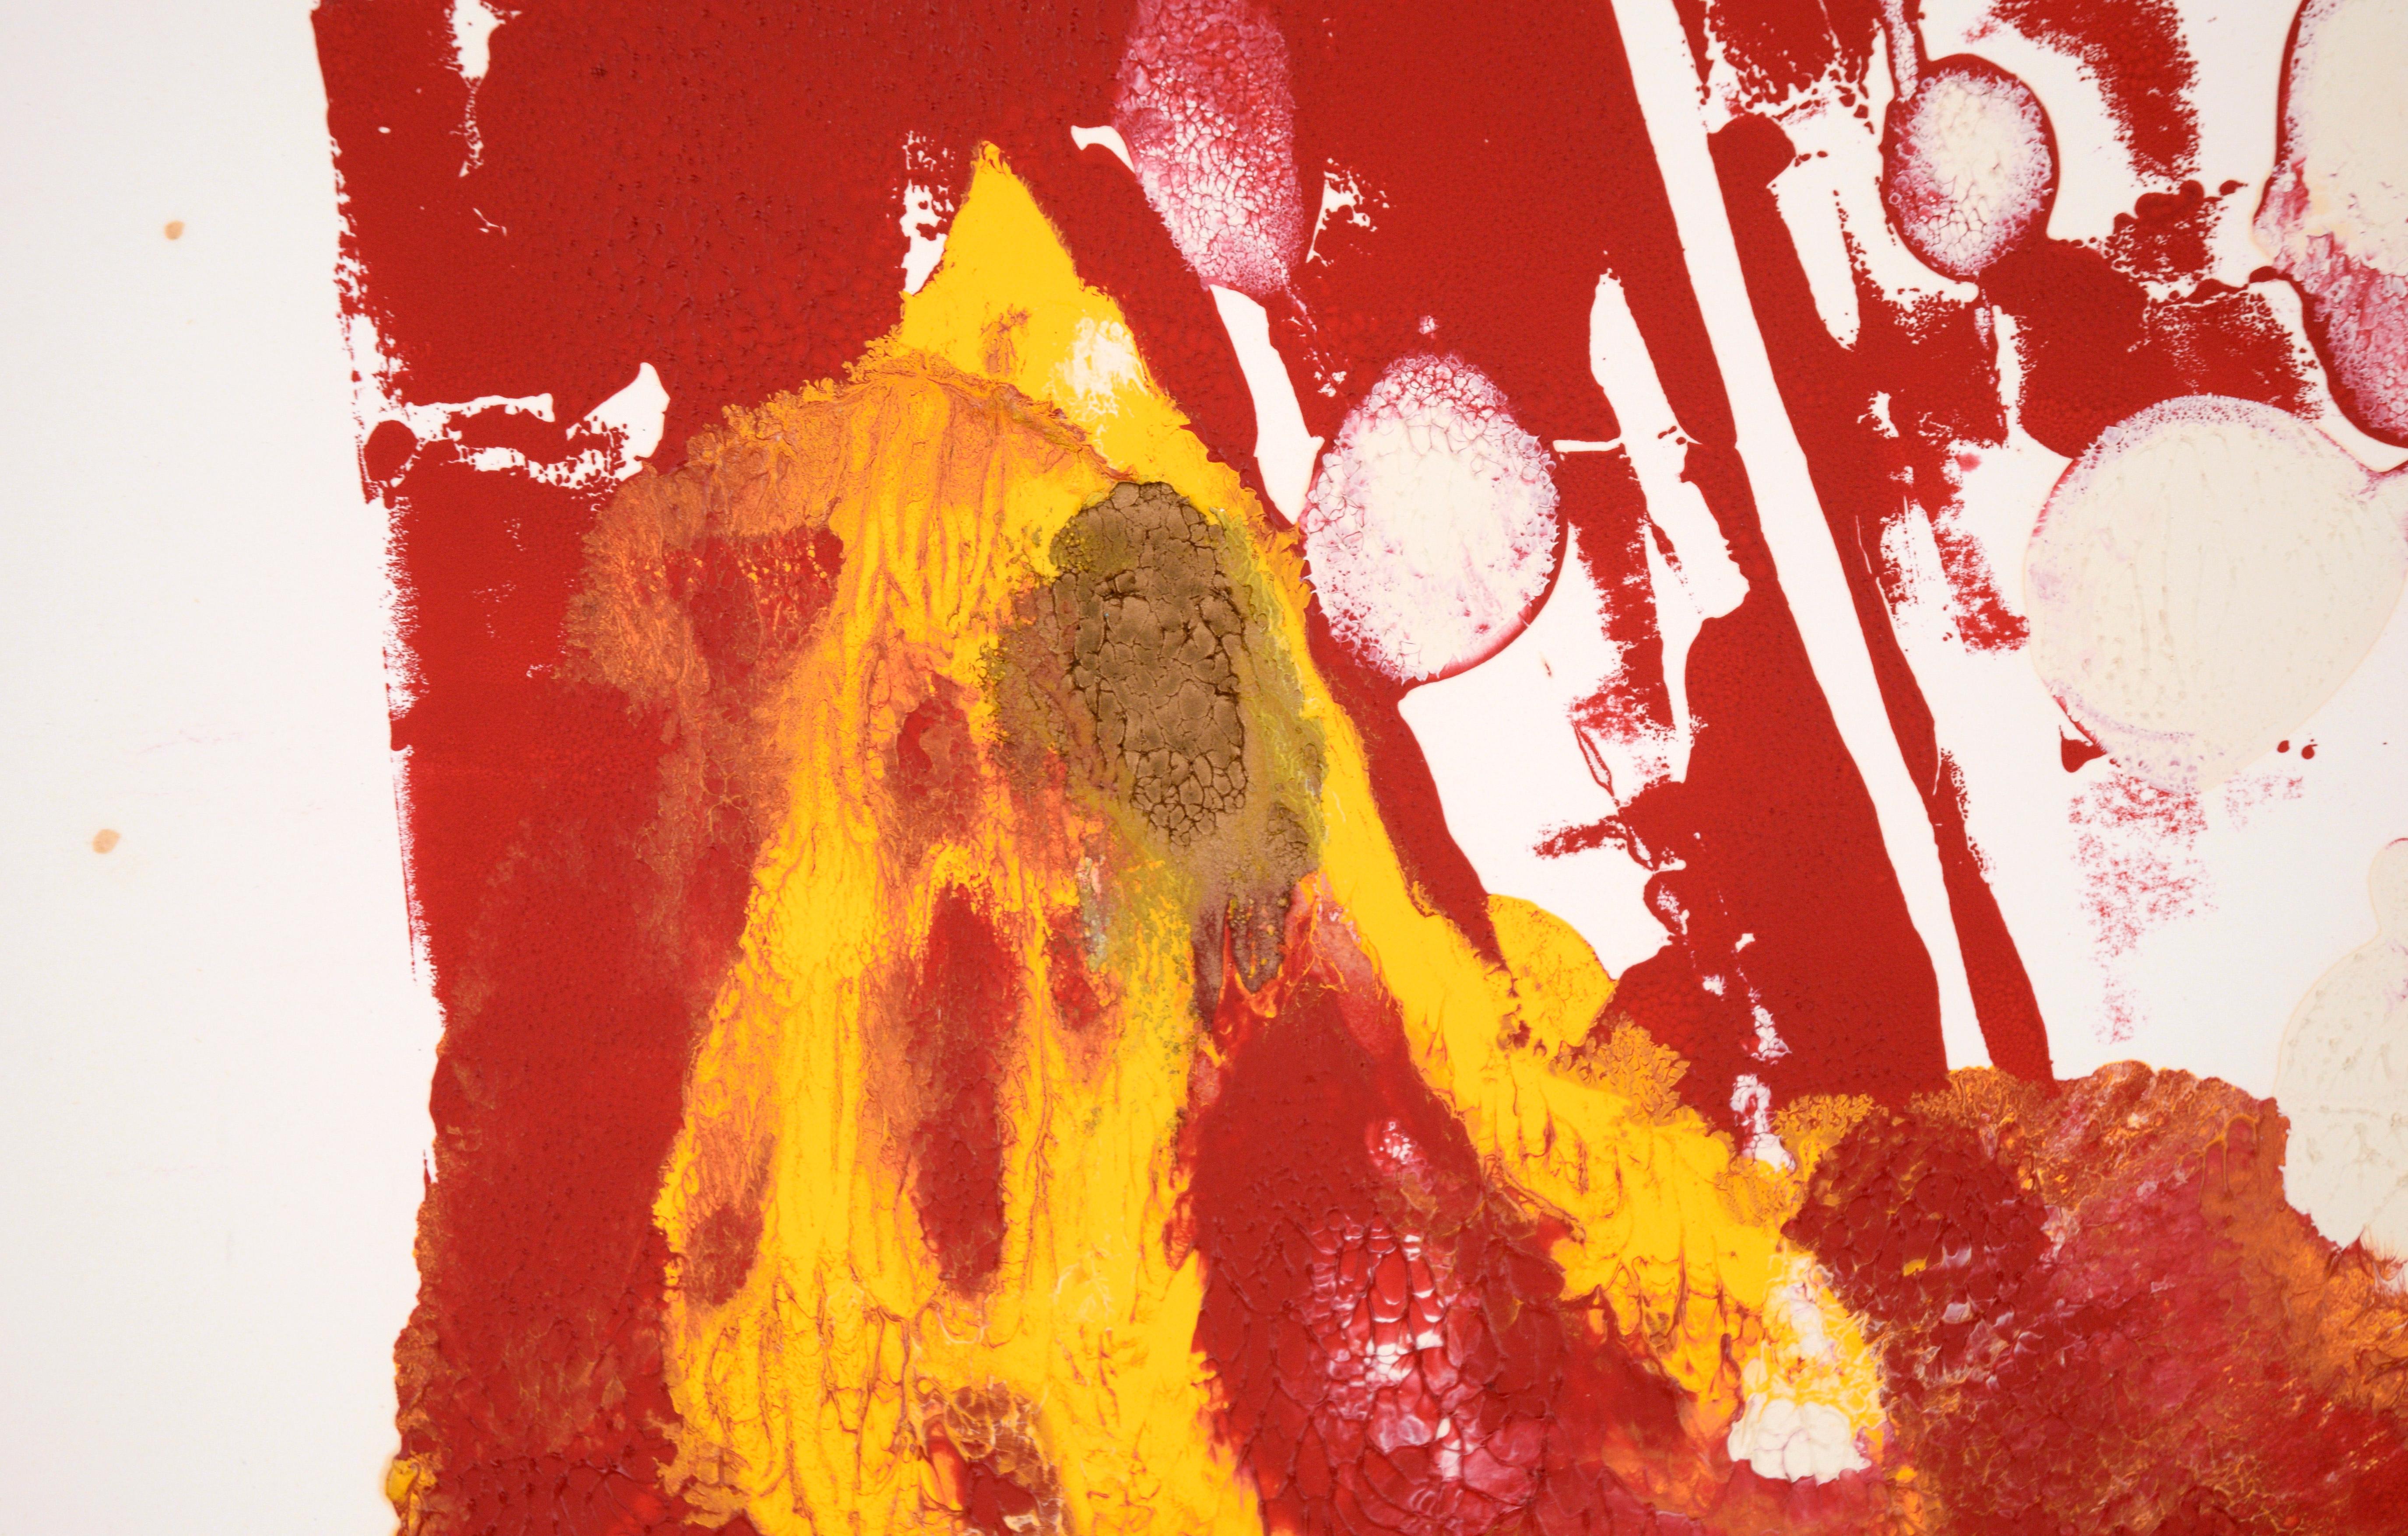 Red Monument - Abstract Composition in Acrylic on Paper - Abstract Expressionist Painting by Ricardo de Silva